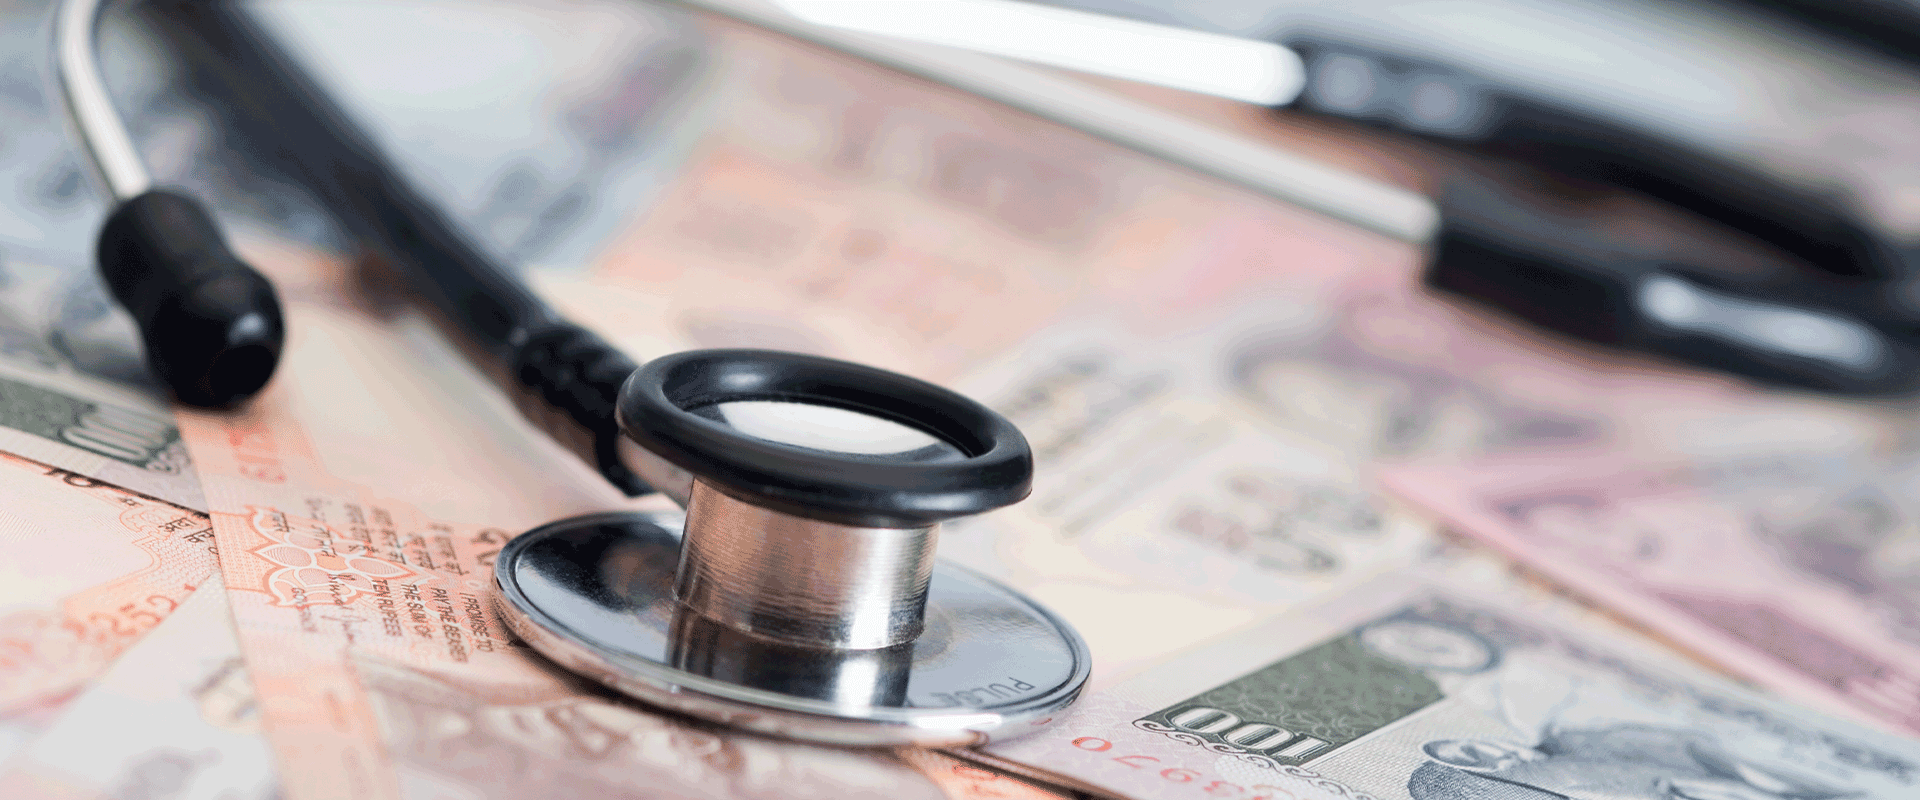 structuring unstructured medical device reimbursement in india | l.e.k. consulting